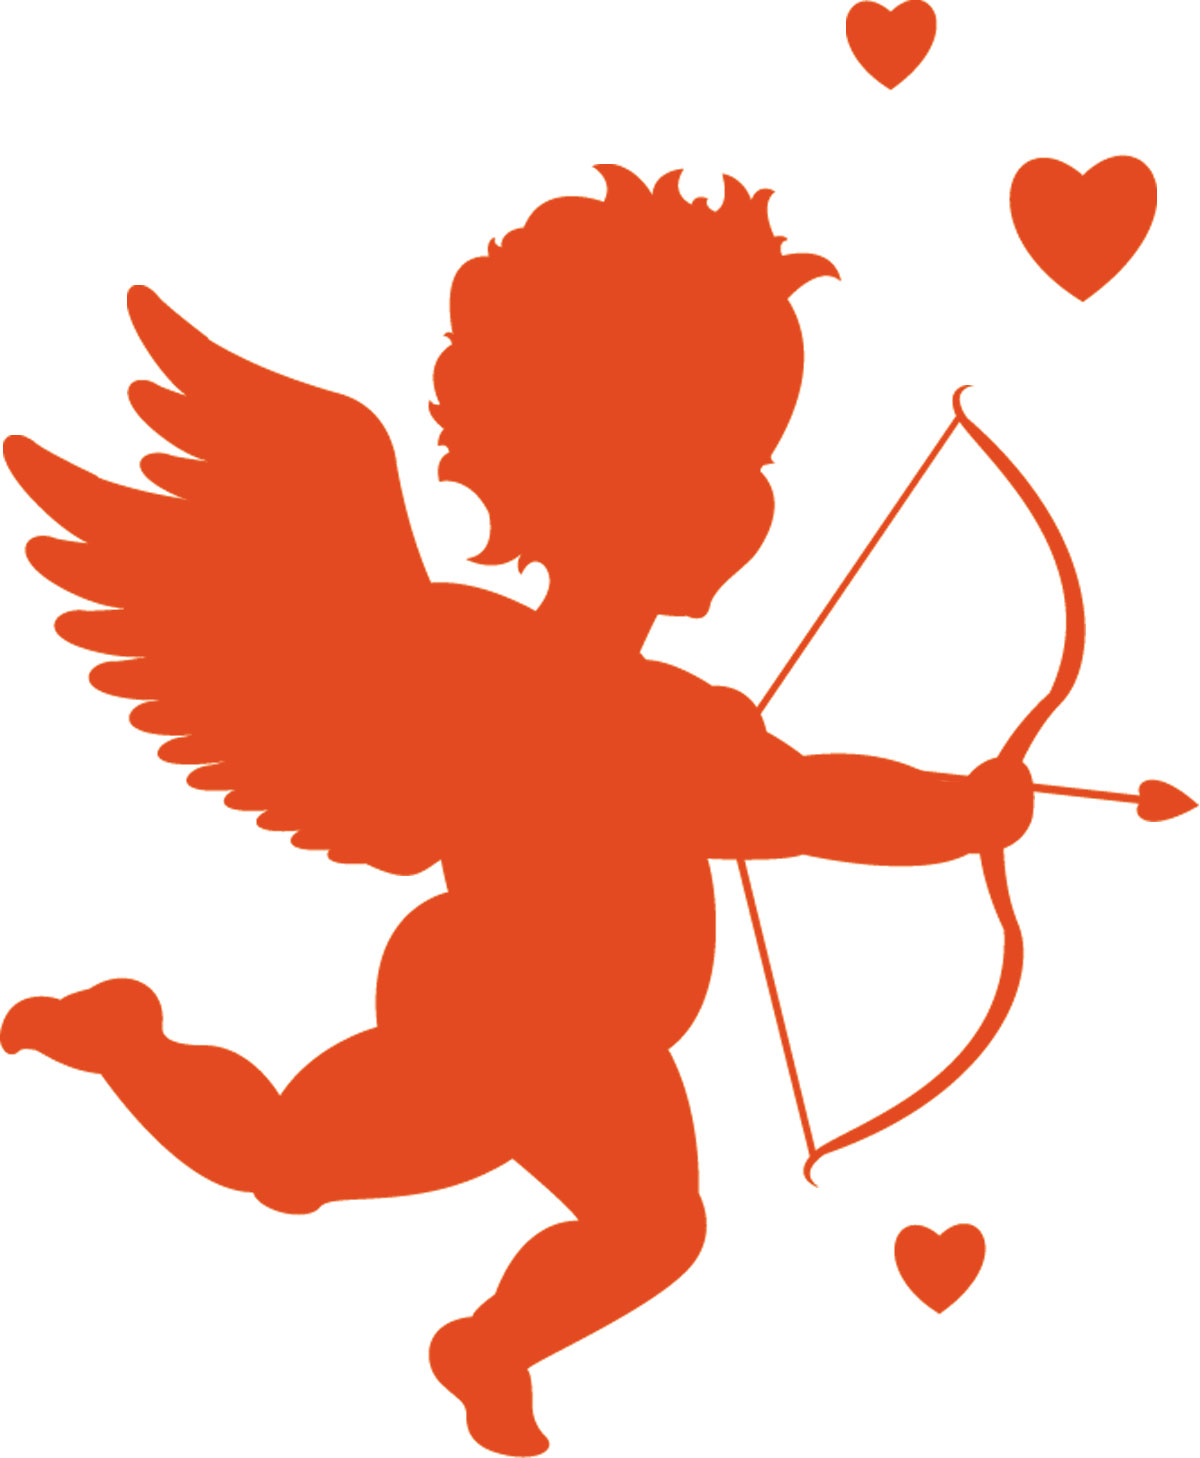 Pictures Of Cupids And Hearts - ClipArt Best